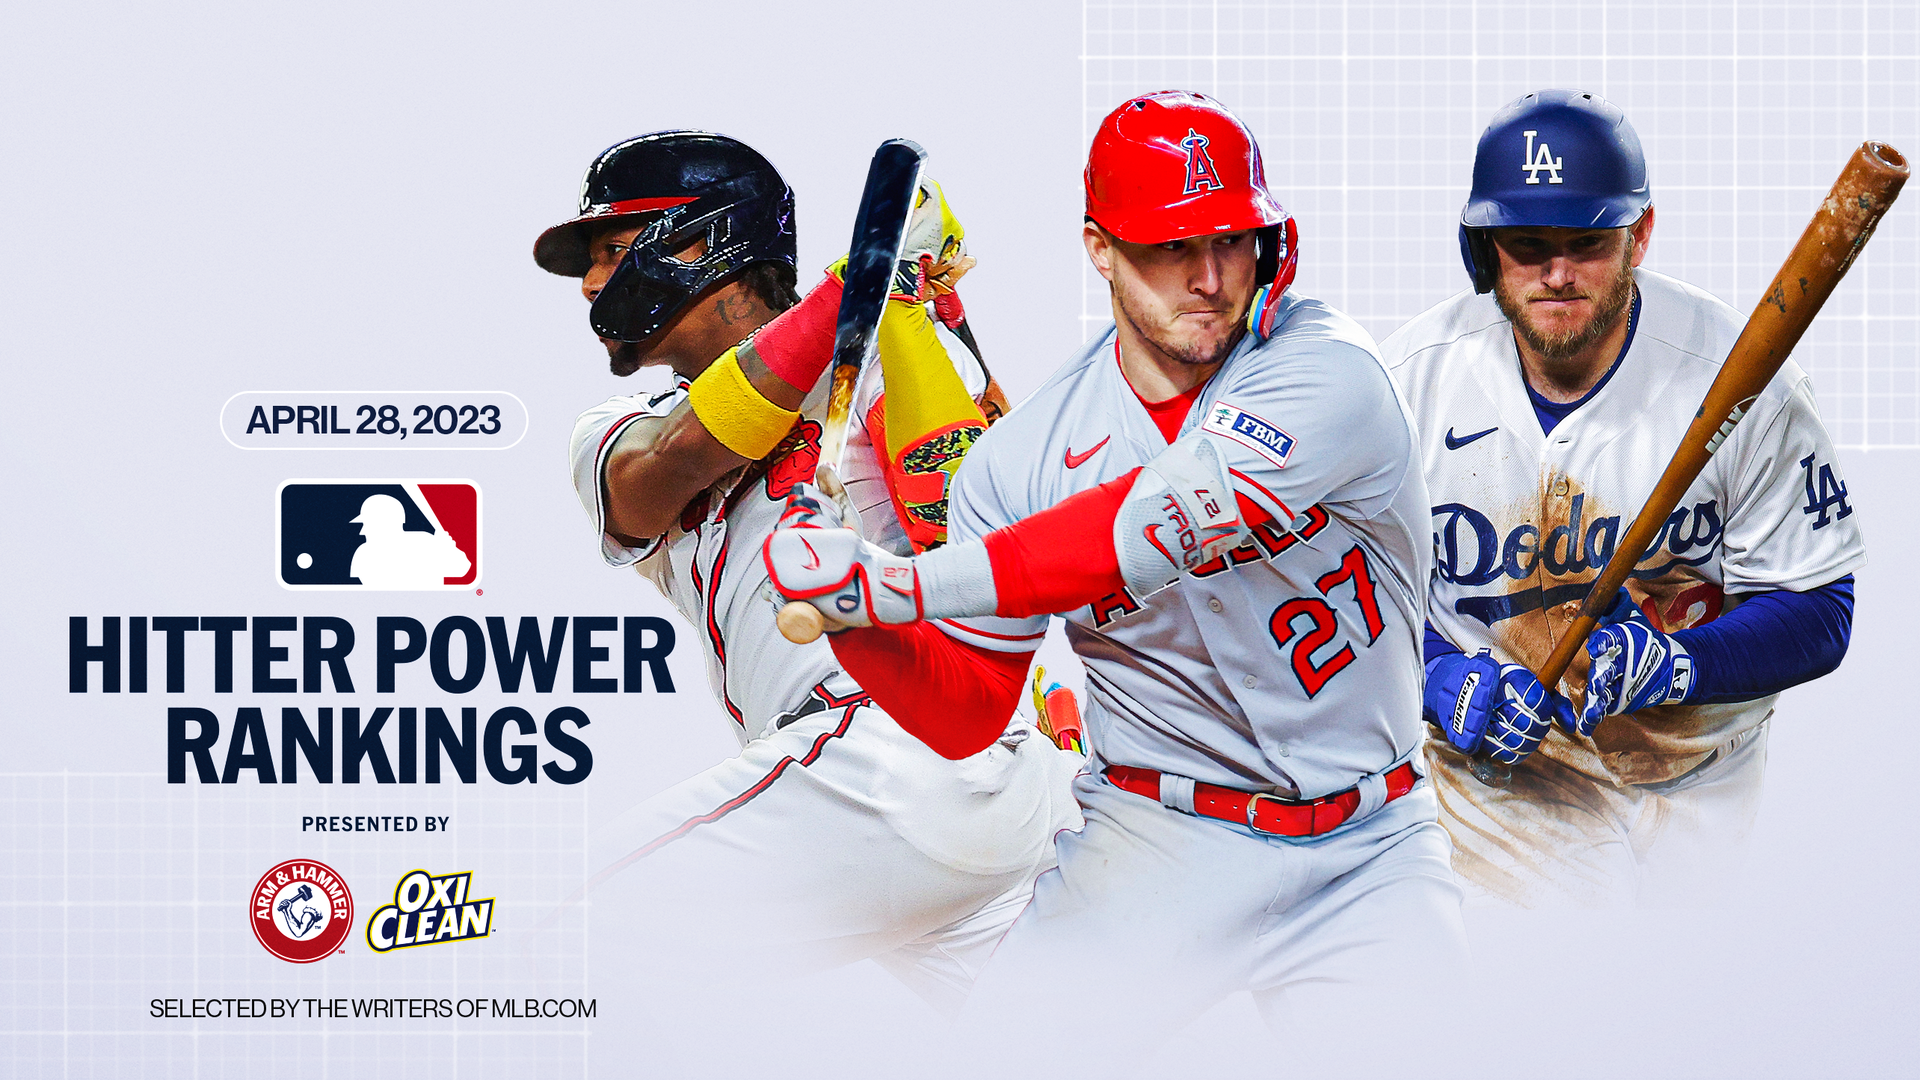 An image promoting Hitter Power Rankings featuring Ronald Acuña Jr., Mike Trout and Max Muncy 